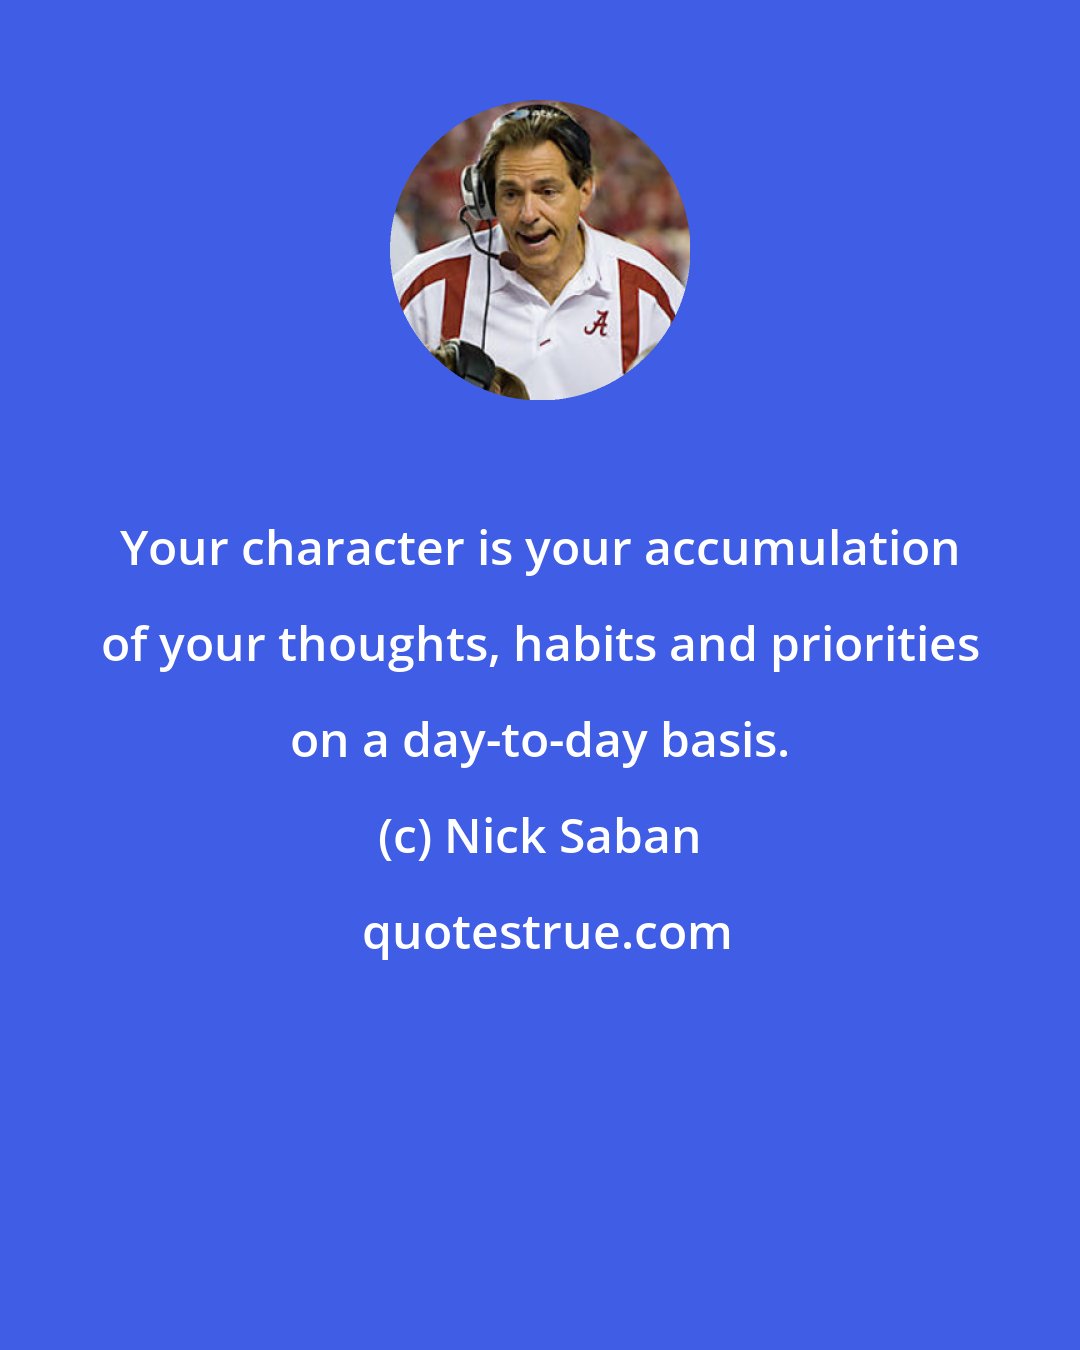 Nick Saban: Your character is your accumulation of your thoughts, habits and priorities on a day-to-day basis.